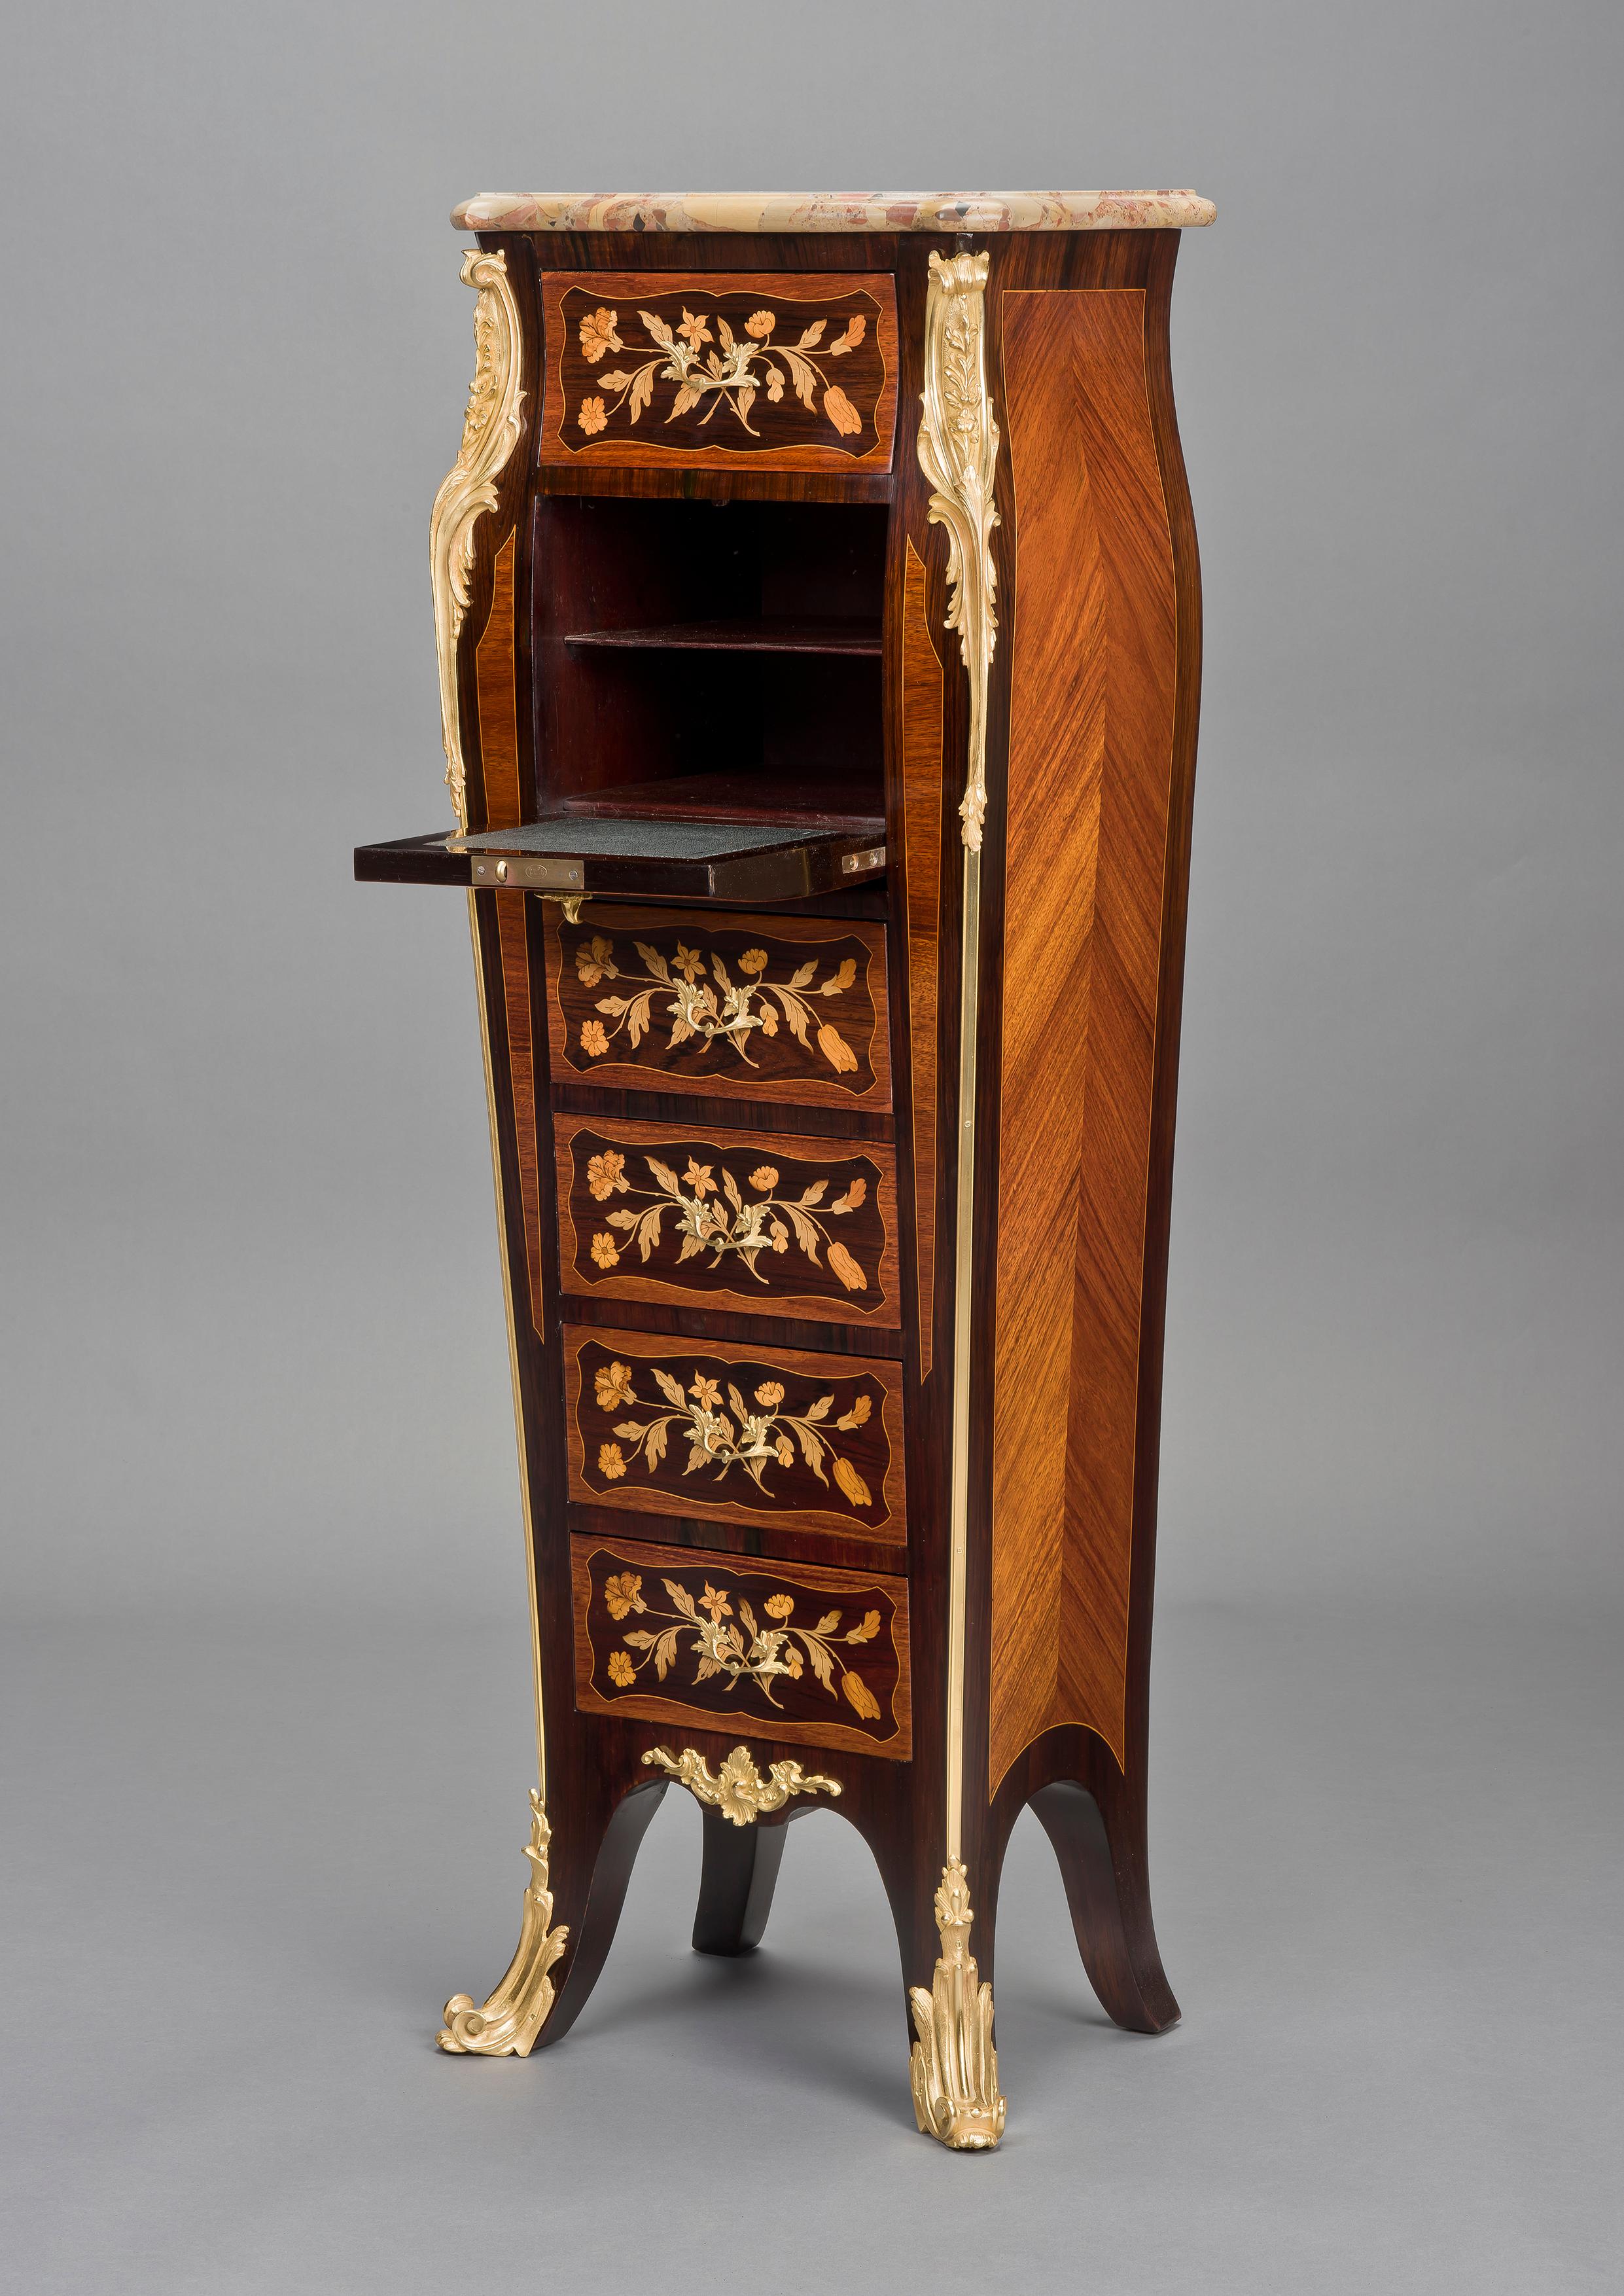 French Louis XV Style Marquetry Inlaid Secretaire Pedestal by Maison Millet, circa 1880